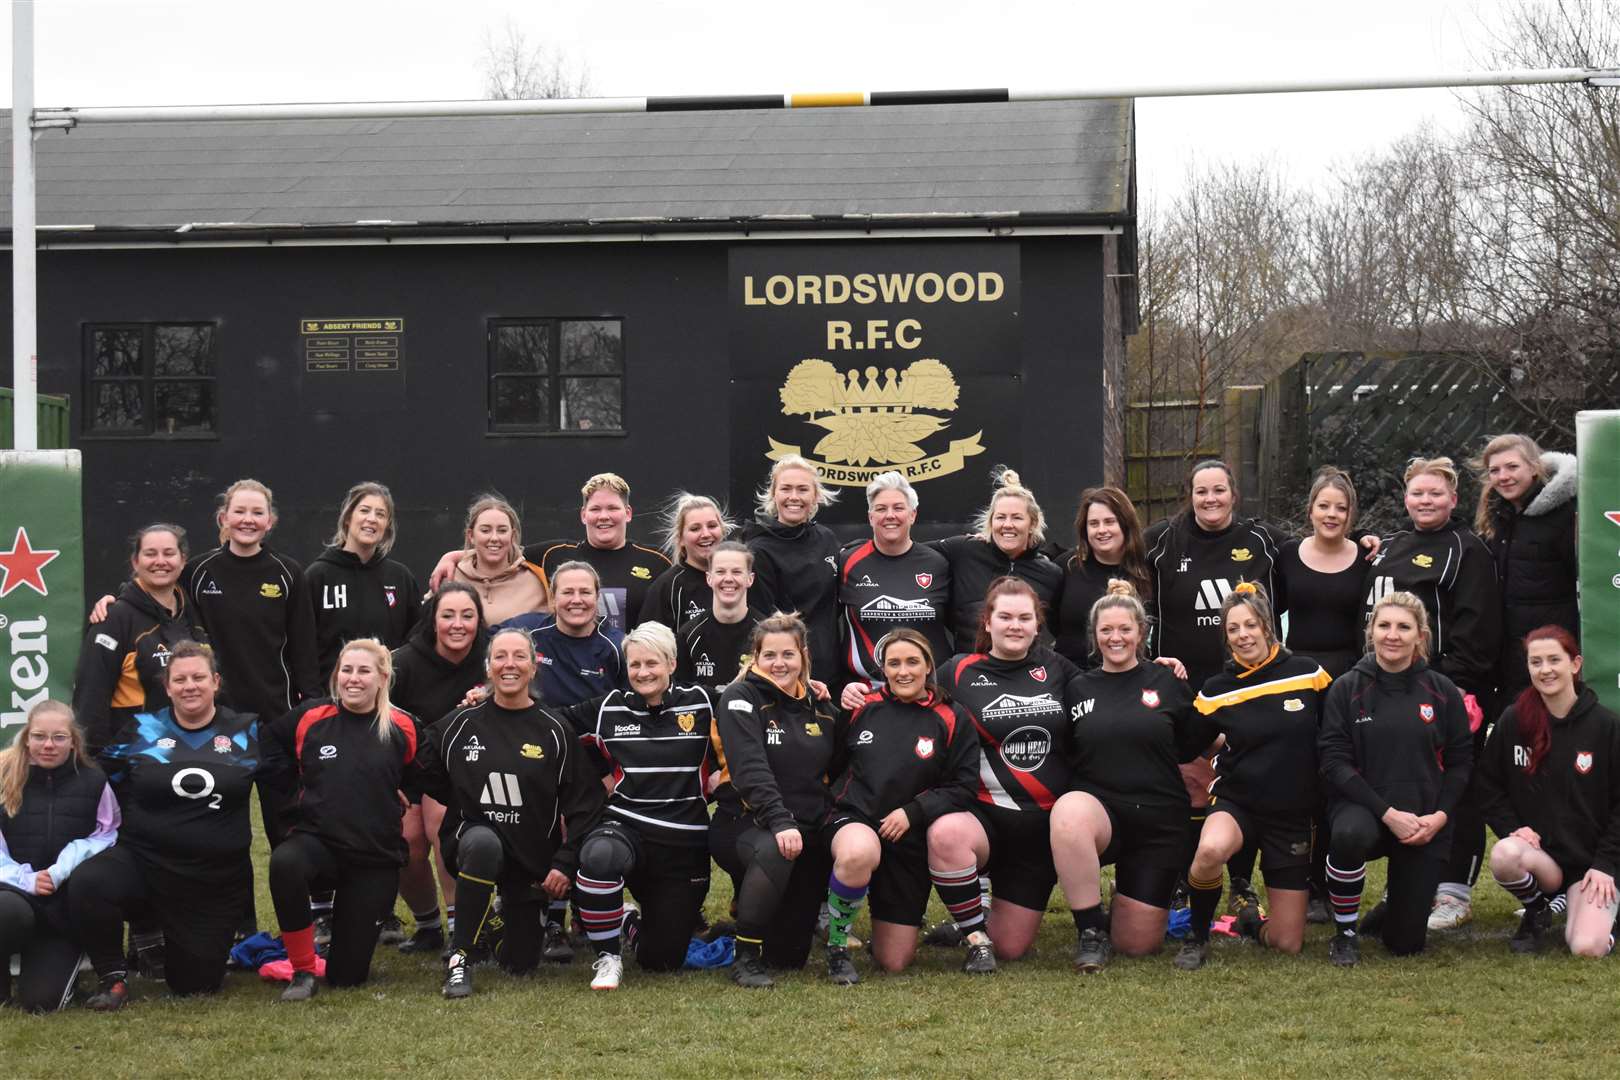 Members of Sheppey Ewes joined Lordswood Valkyries for a training session with England duo Rosie Galligan and Marlie Packer